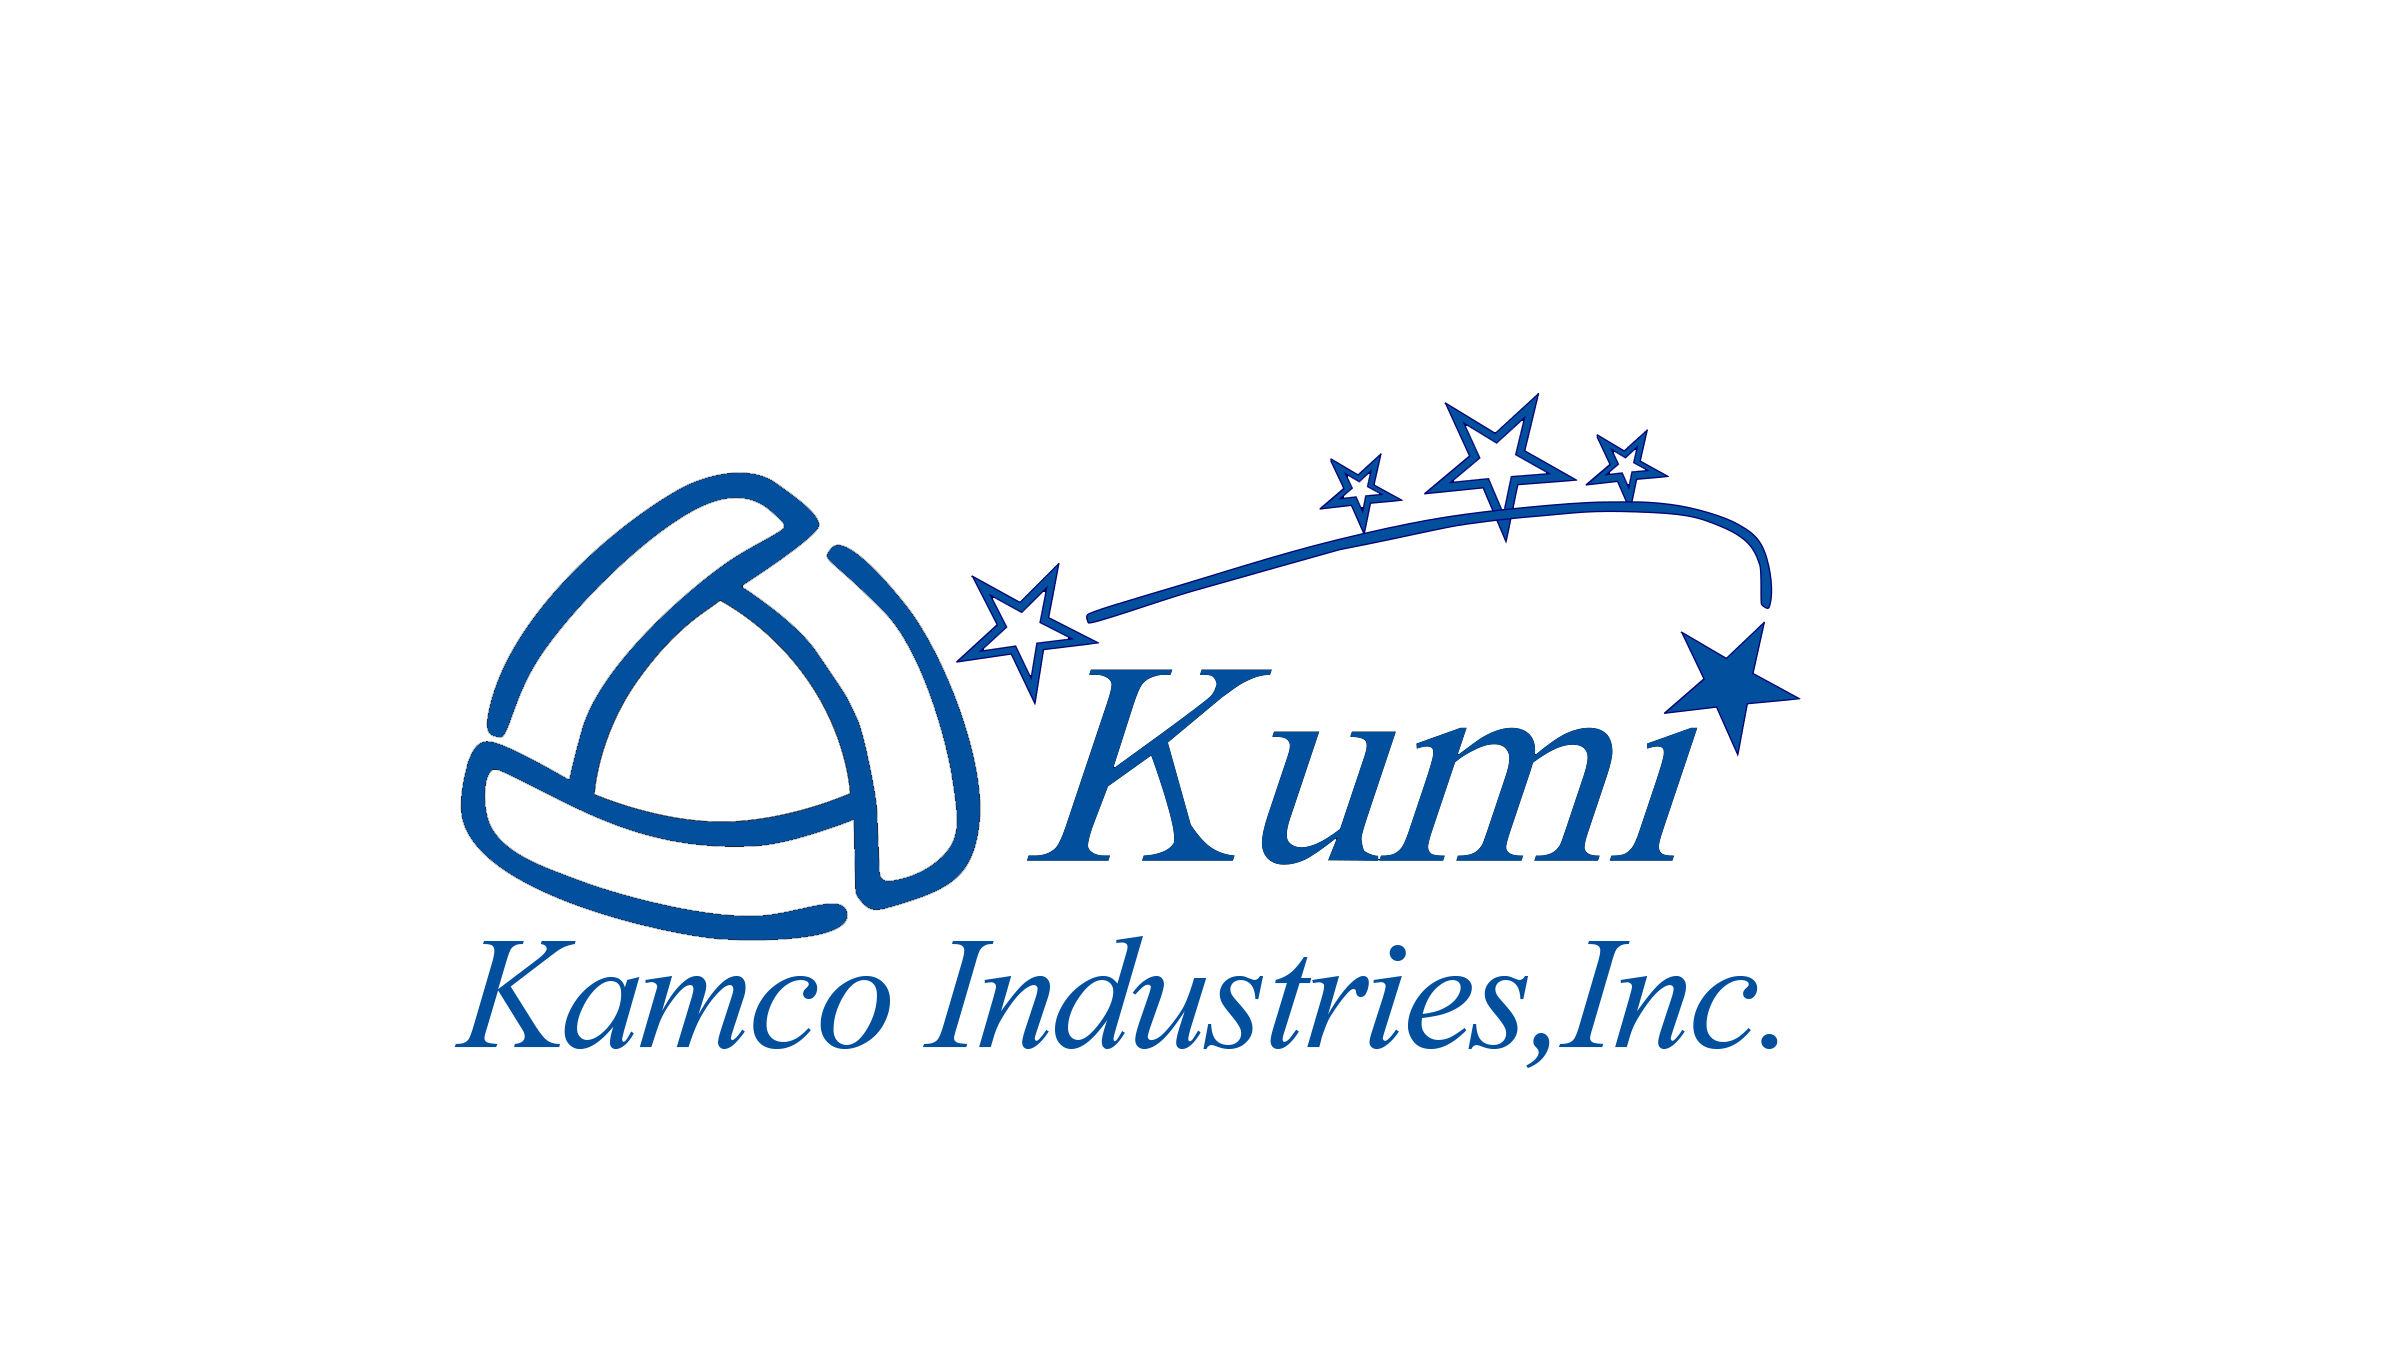 KAMCO Industries社のロゴ